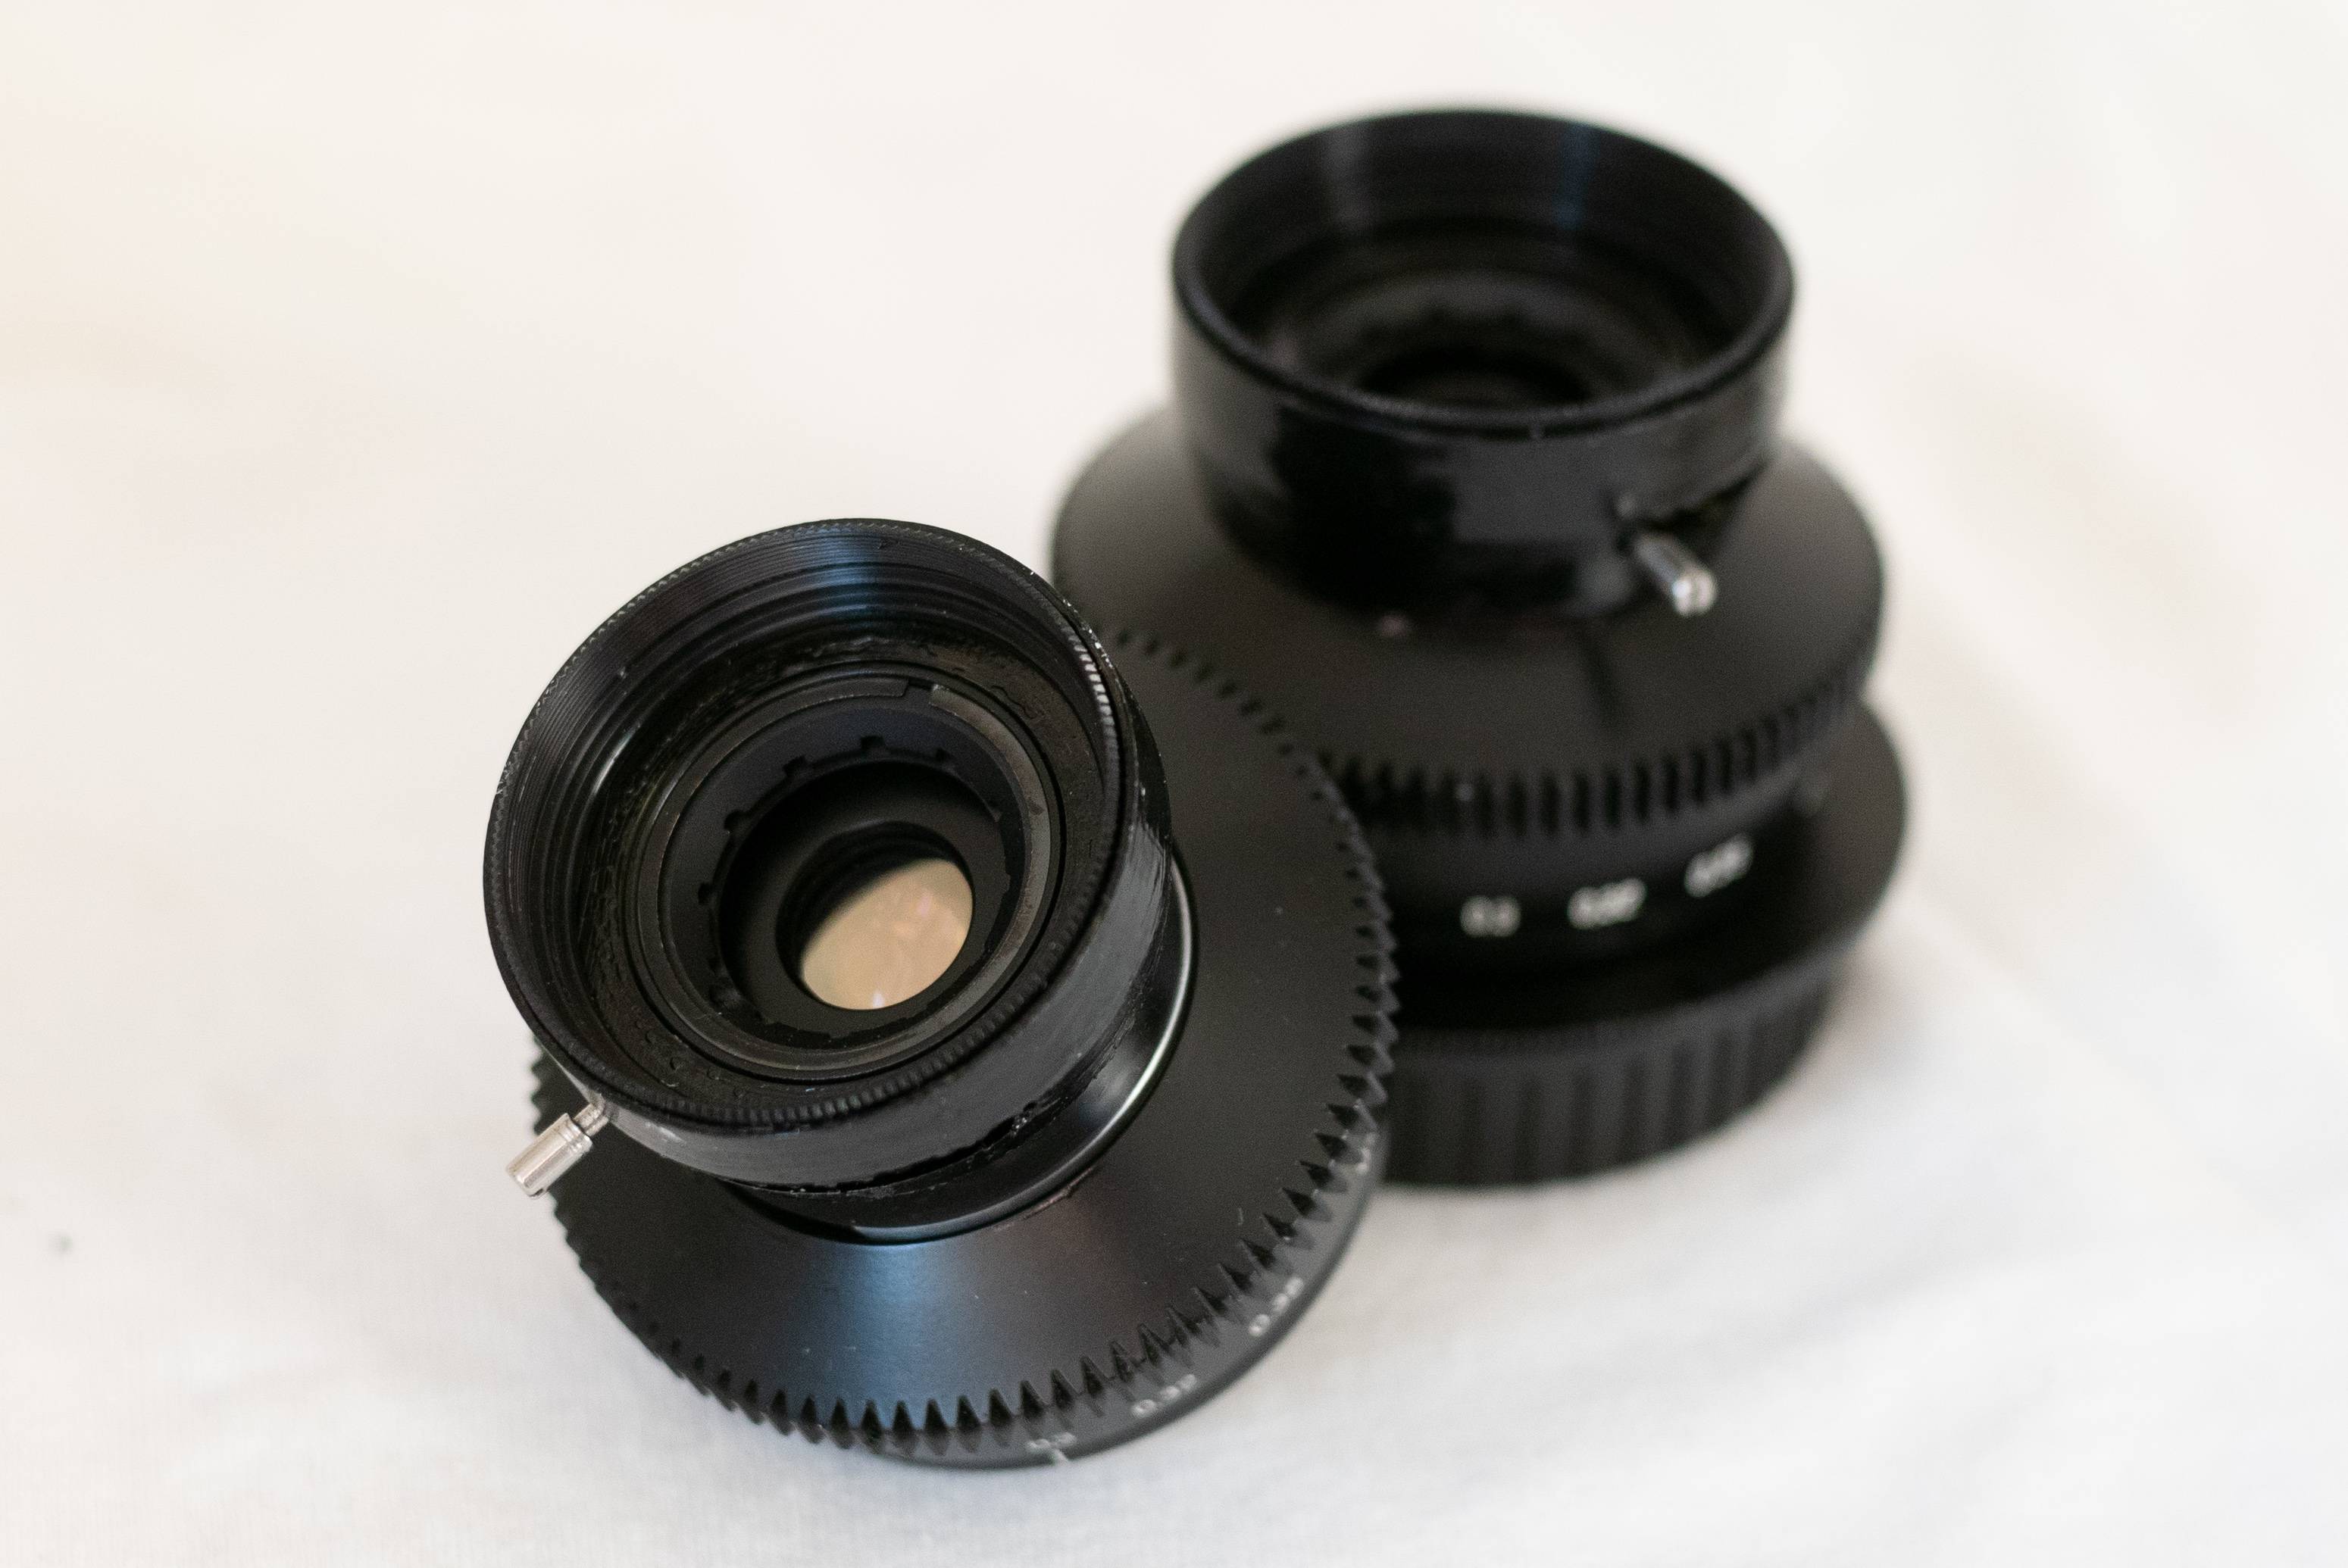 A pair of SO-3.1 lenses adapted for modern cameras.